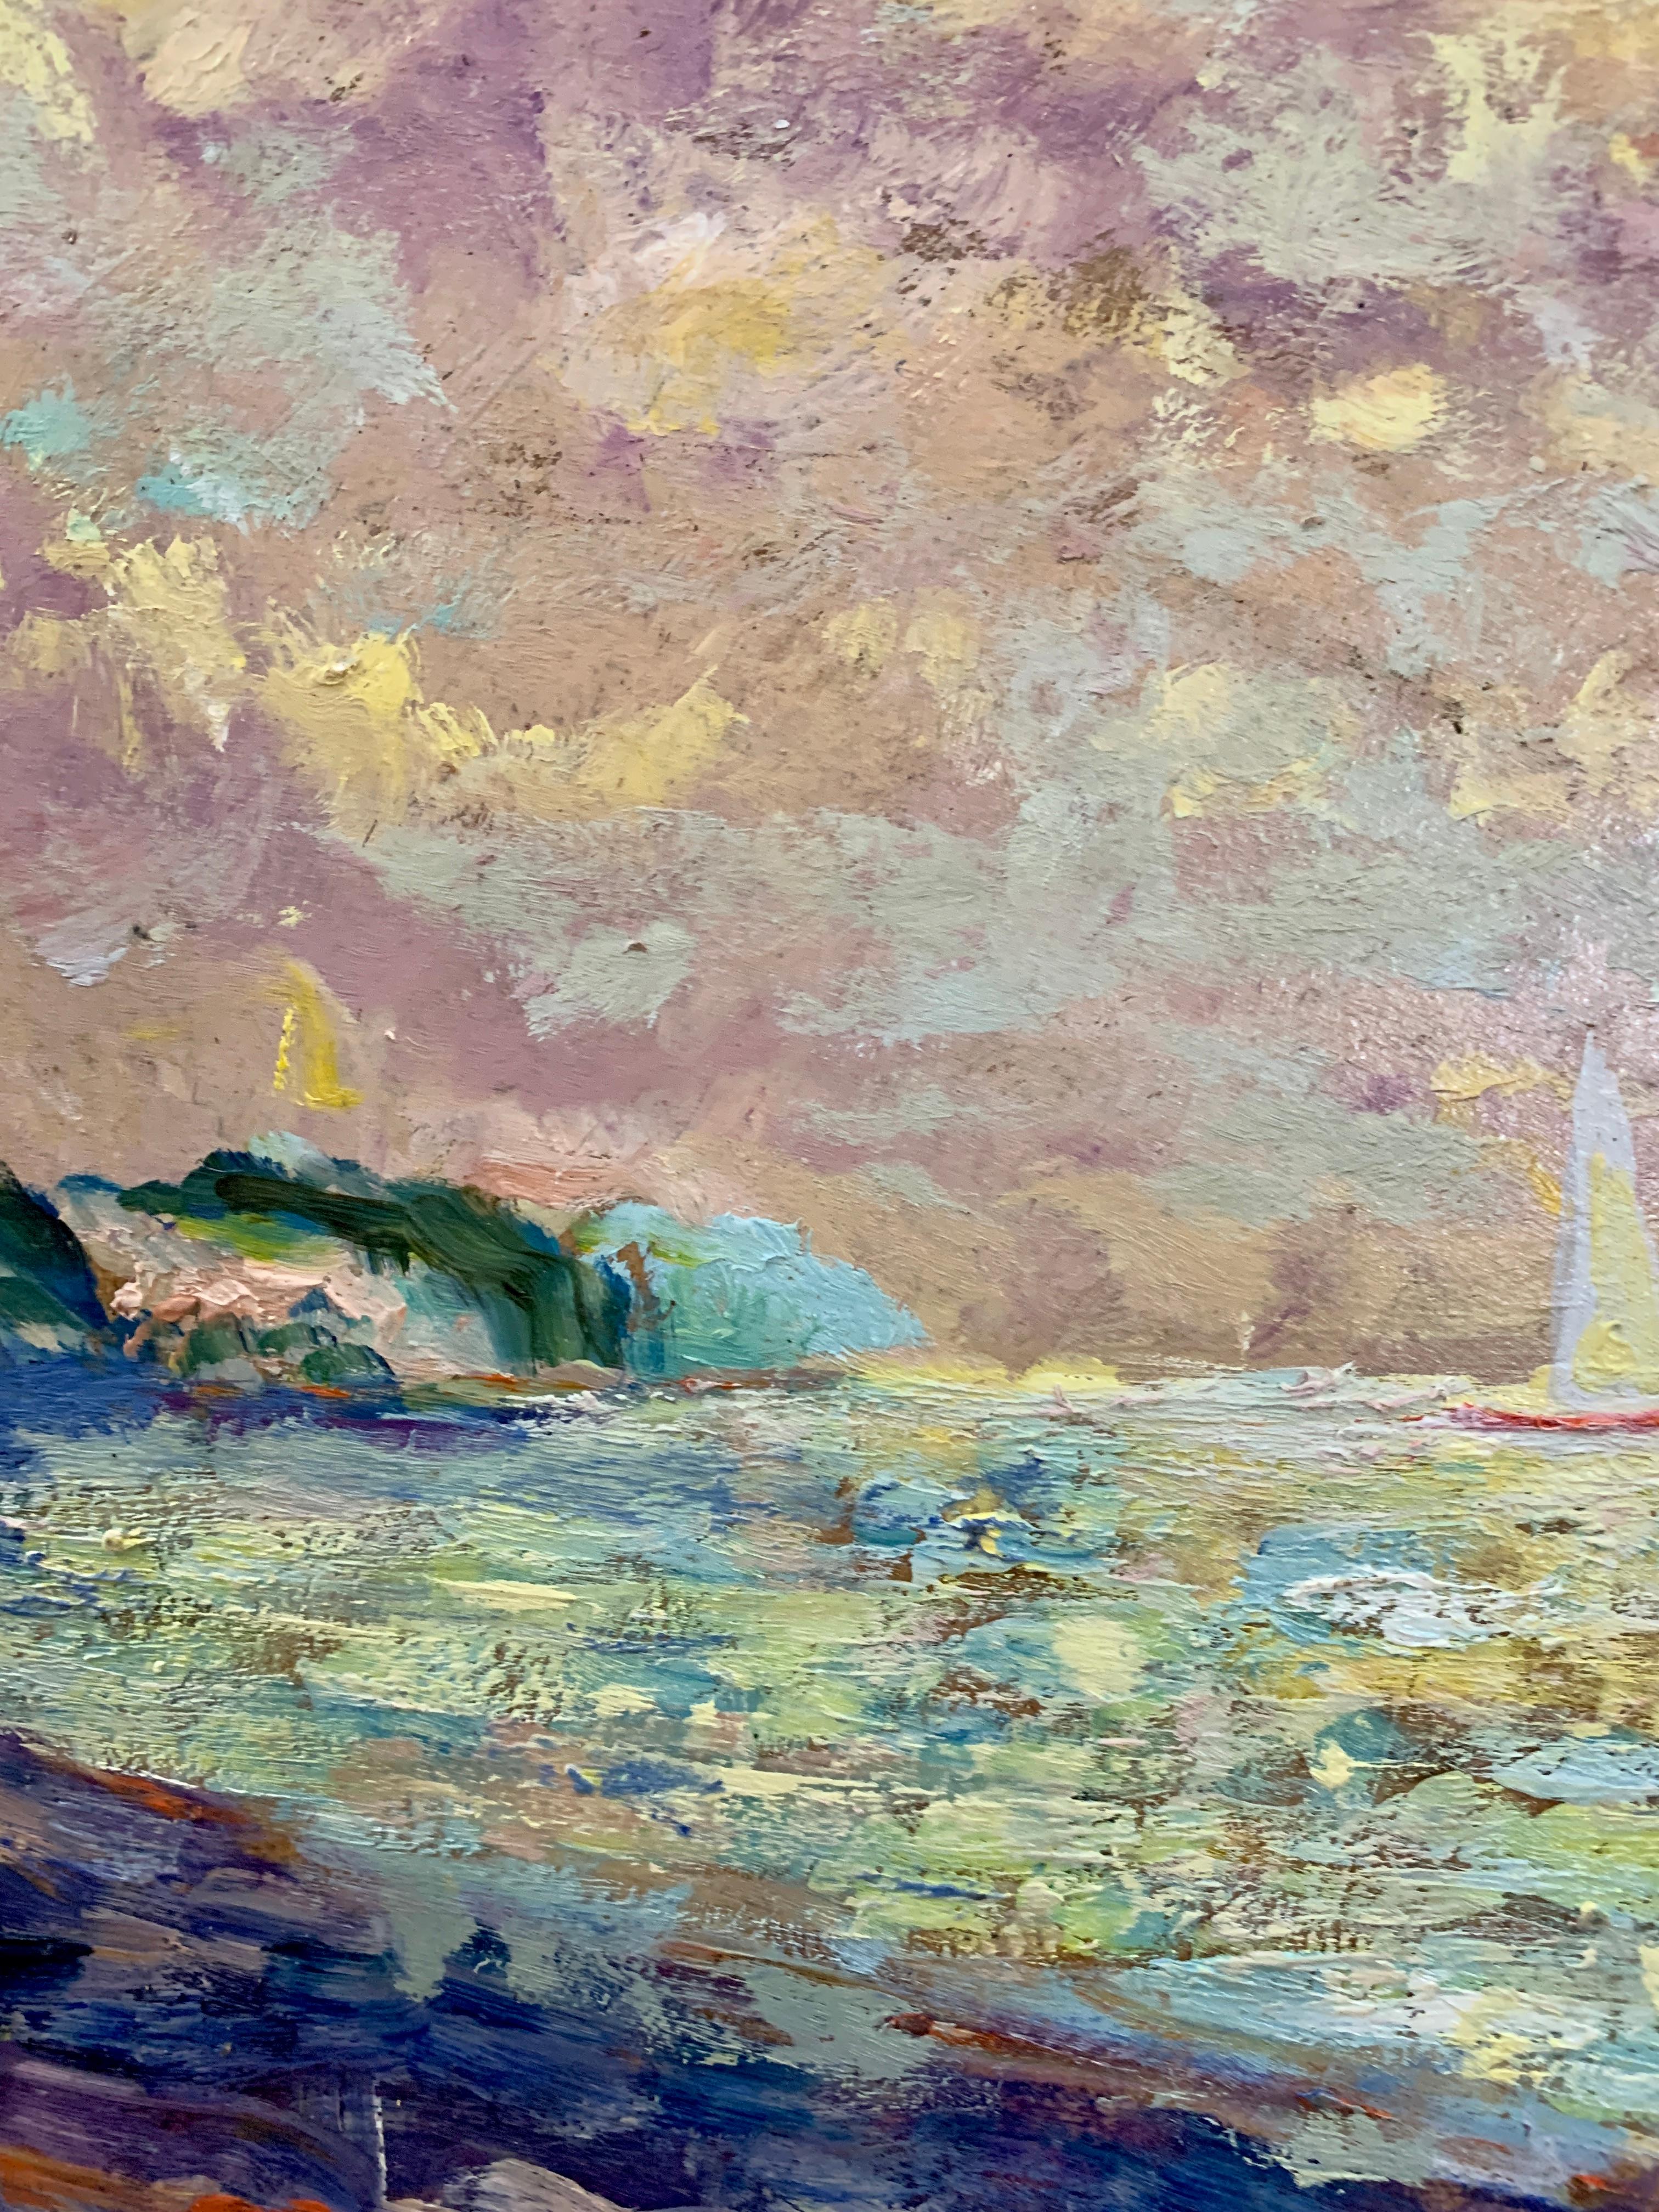 Impressionist Late 20th century seascape, a French coastal scene with yachts - Painting by Charles Bertie Hall